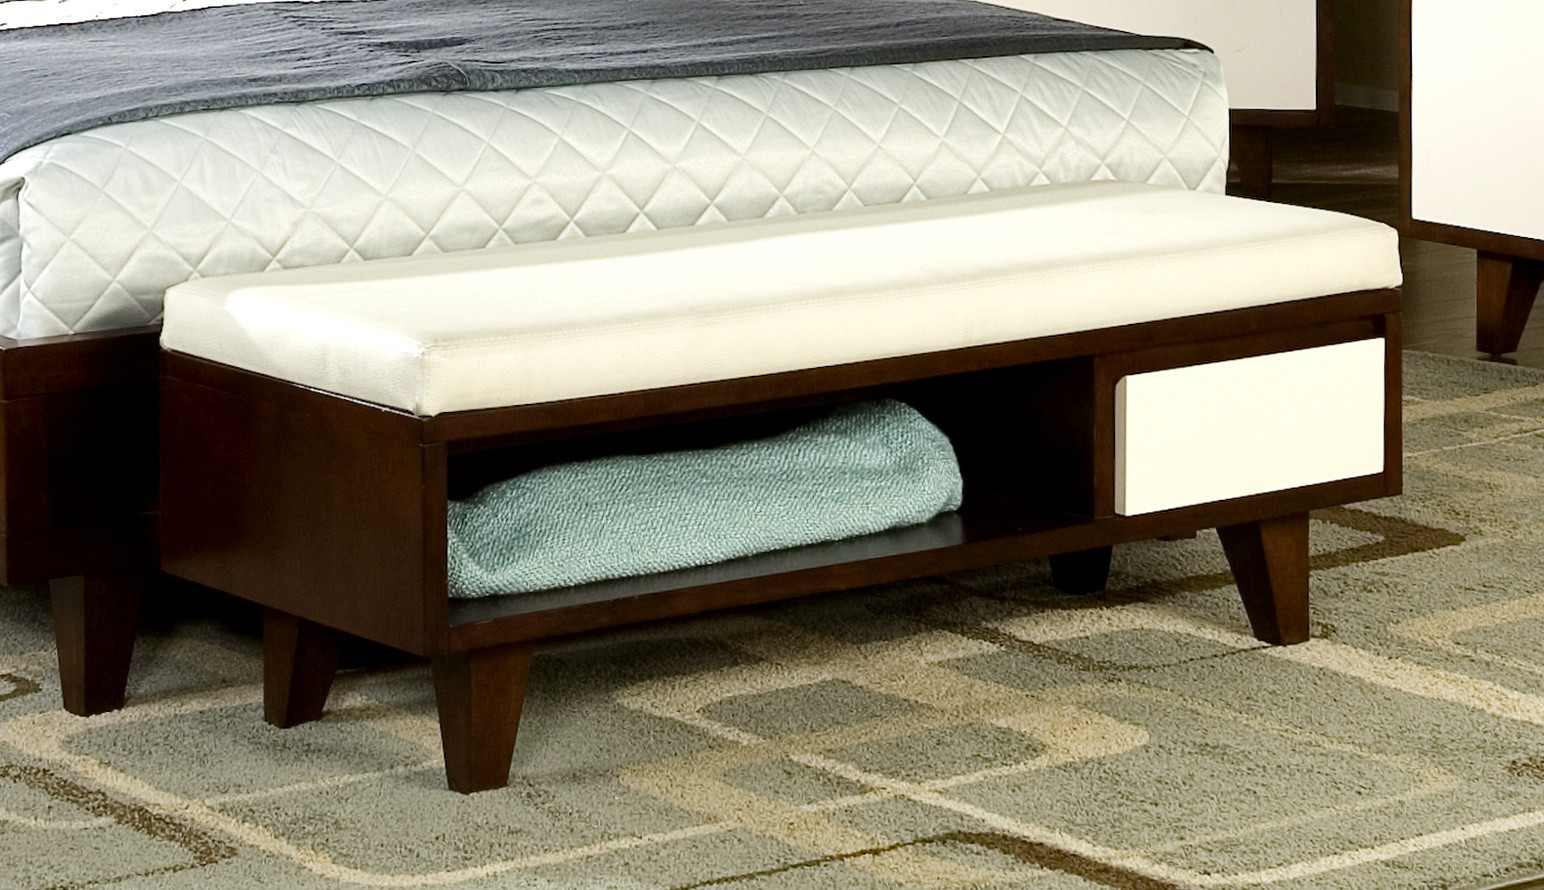 End Of Bed Storage Bench
 Bedroom Benches with Storage Ideas